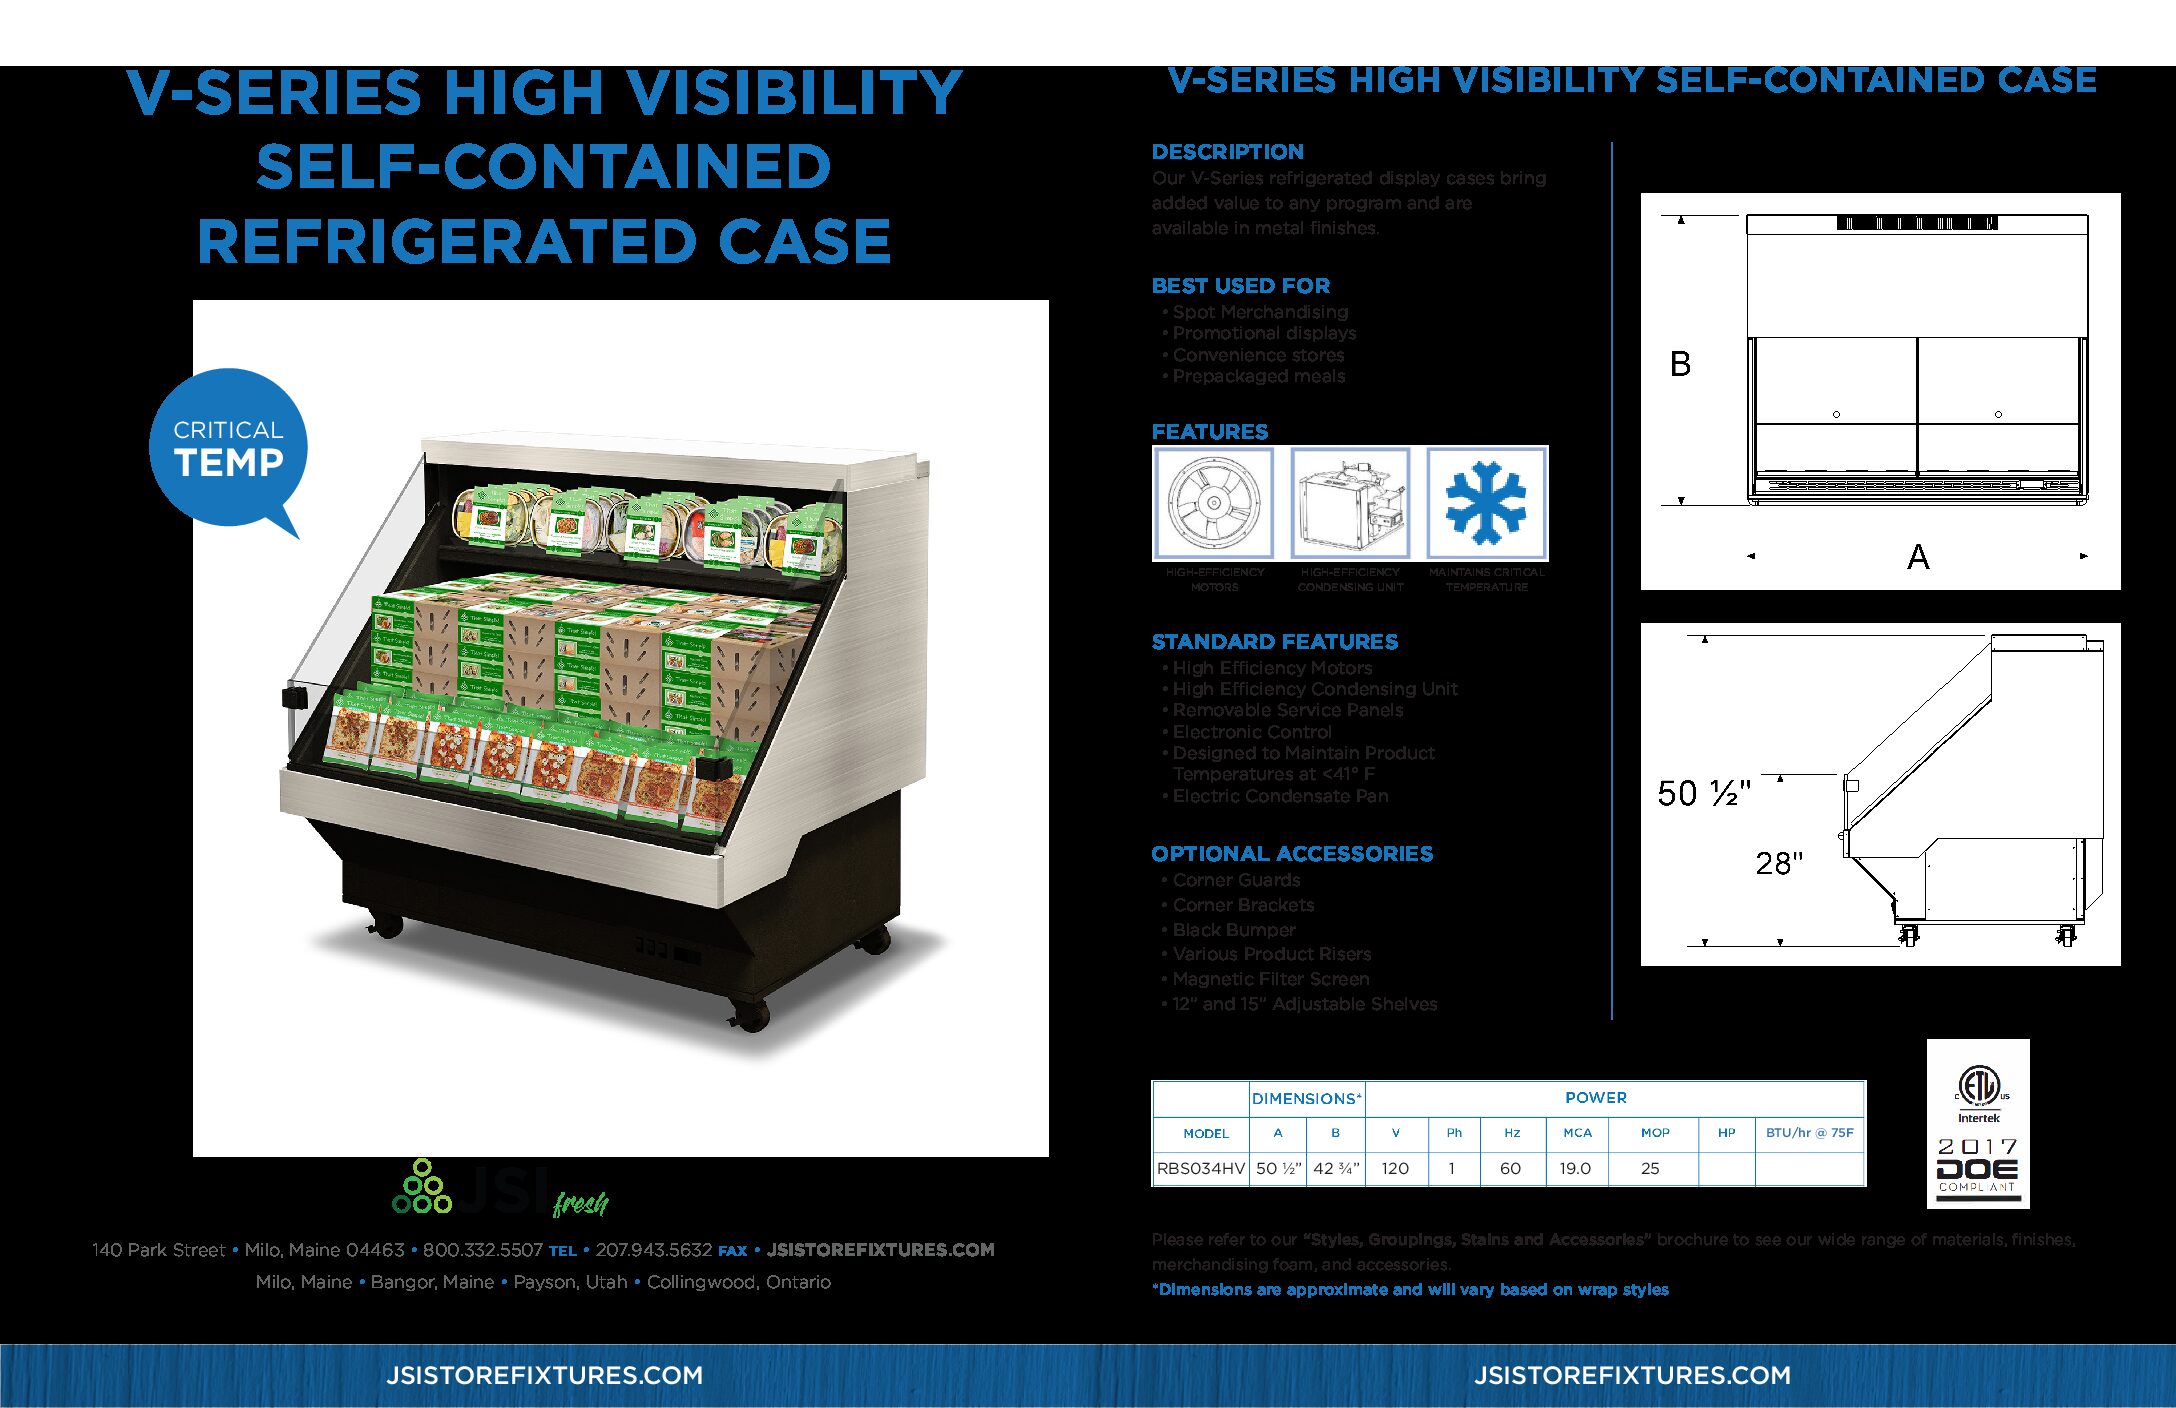 V-Series High Visibility Self-Contained Refrigerated Case Spec Sheet (PDF)